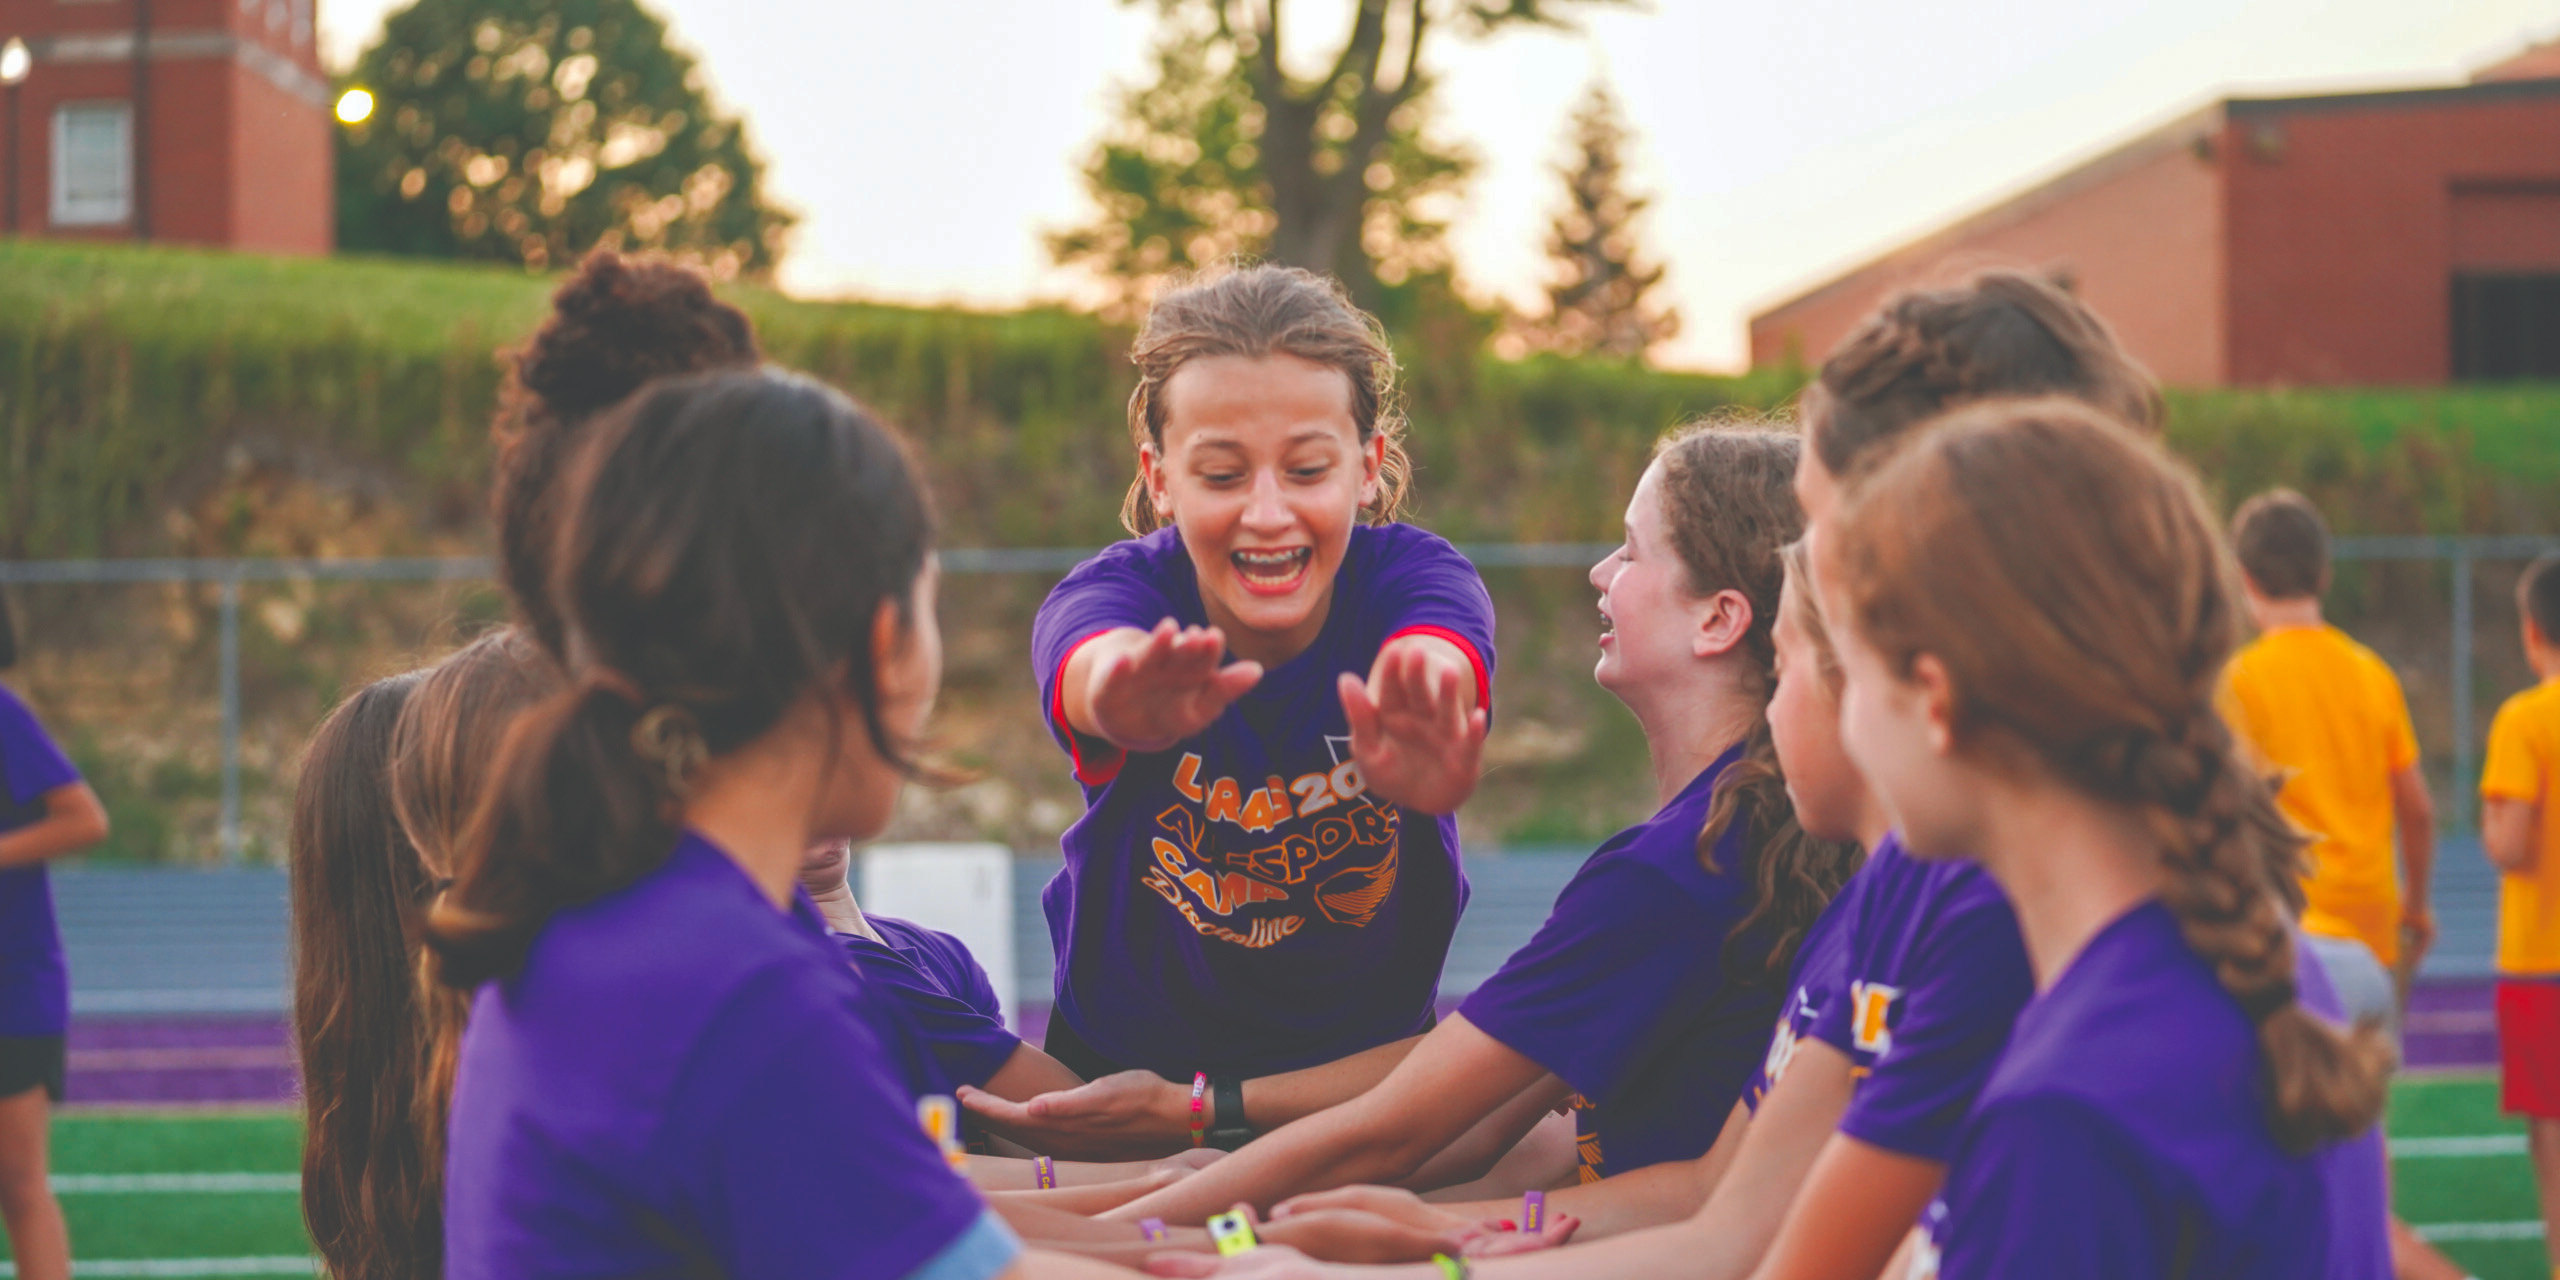 All-Sports Camp student smiling and diving into the arms of her teammates who are waiting to catch her.